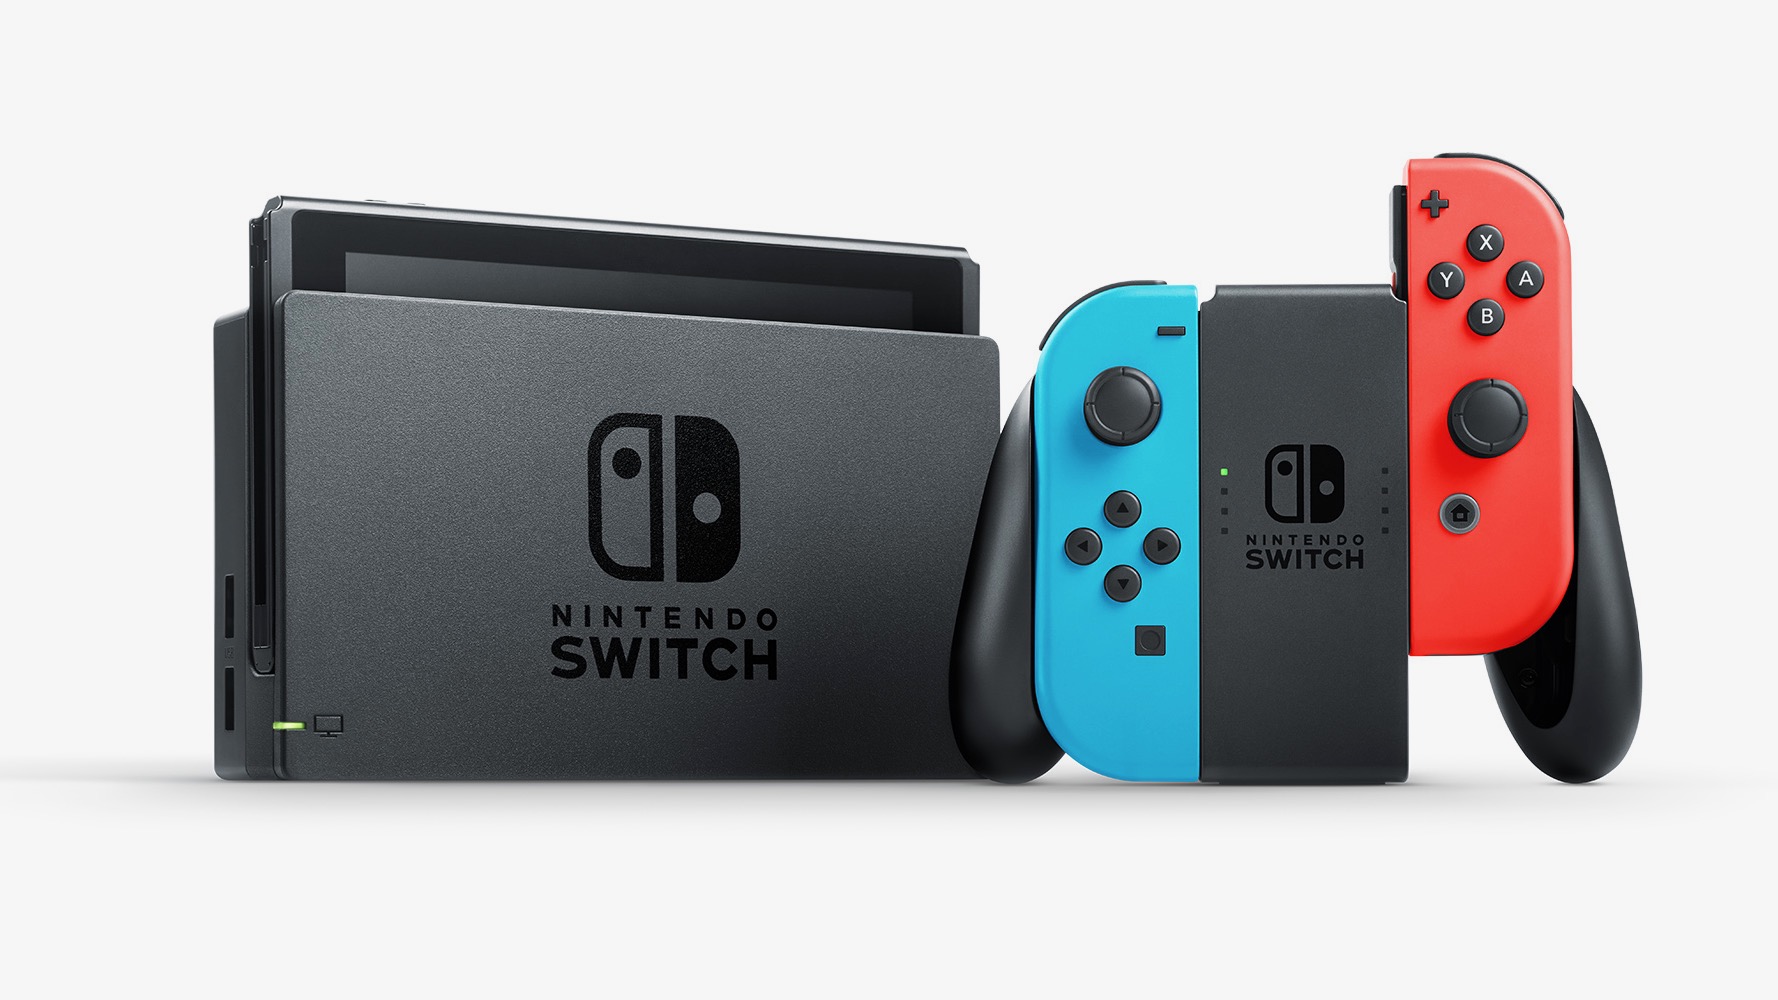 nintendo-switch-pro:-everything-we-know-so-far-about-the-oled-nintendo-switch-2